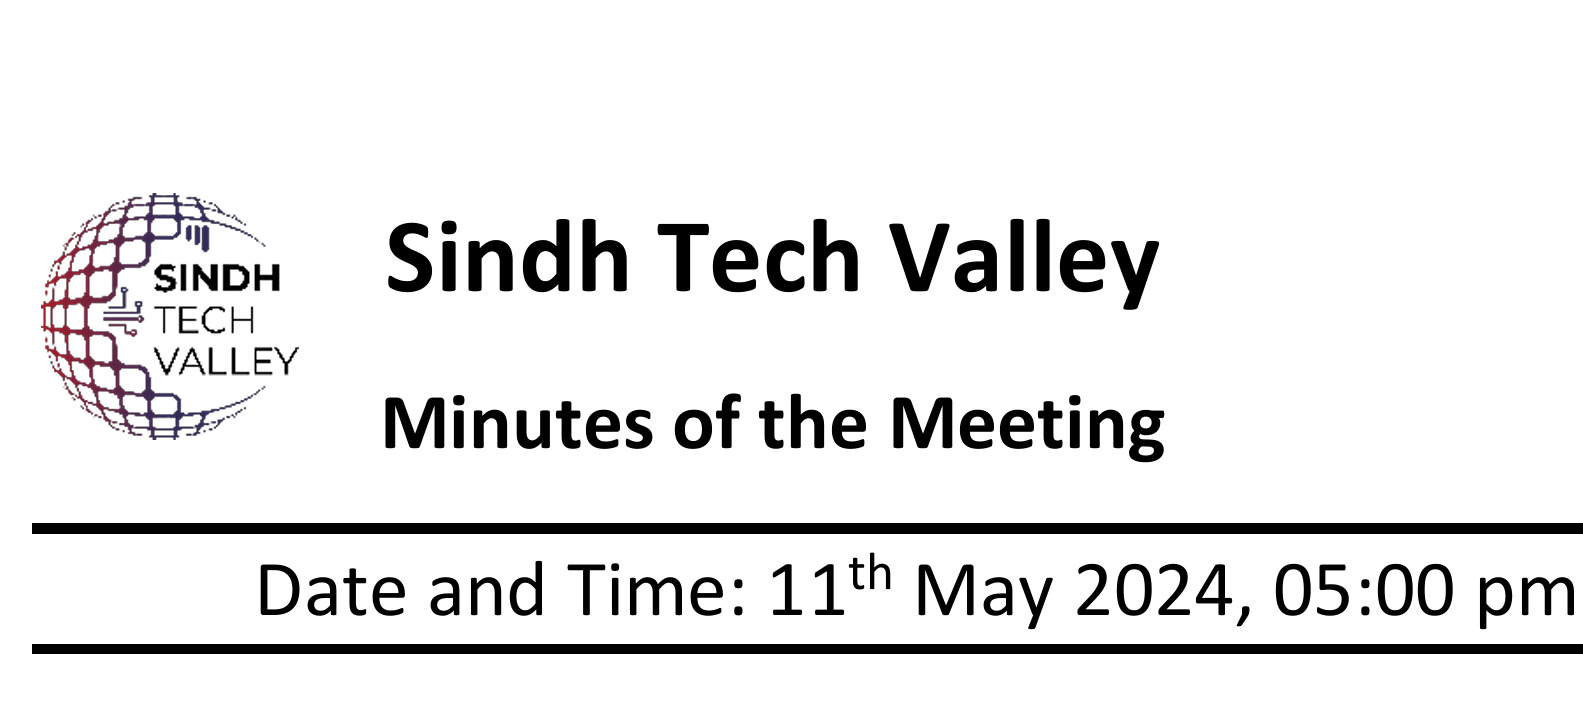 Sindh Tech Valley Unveils Strategy to Empower Youth in Landmark Meeting